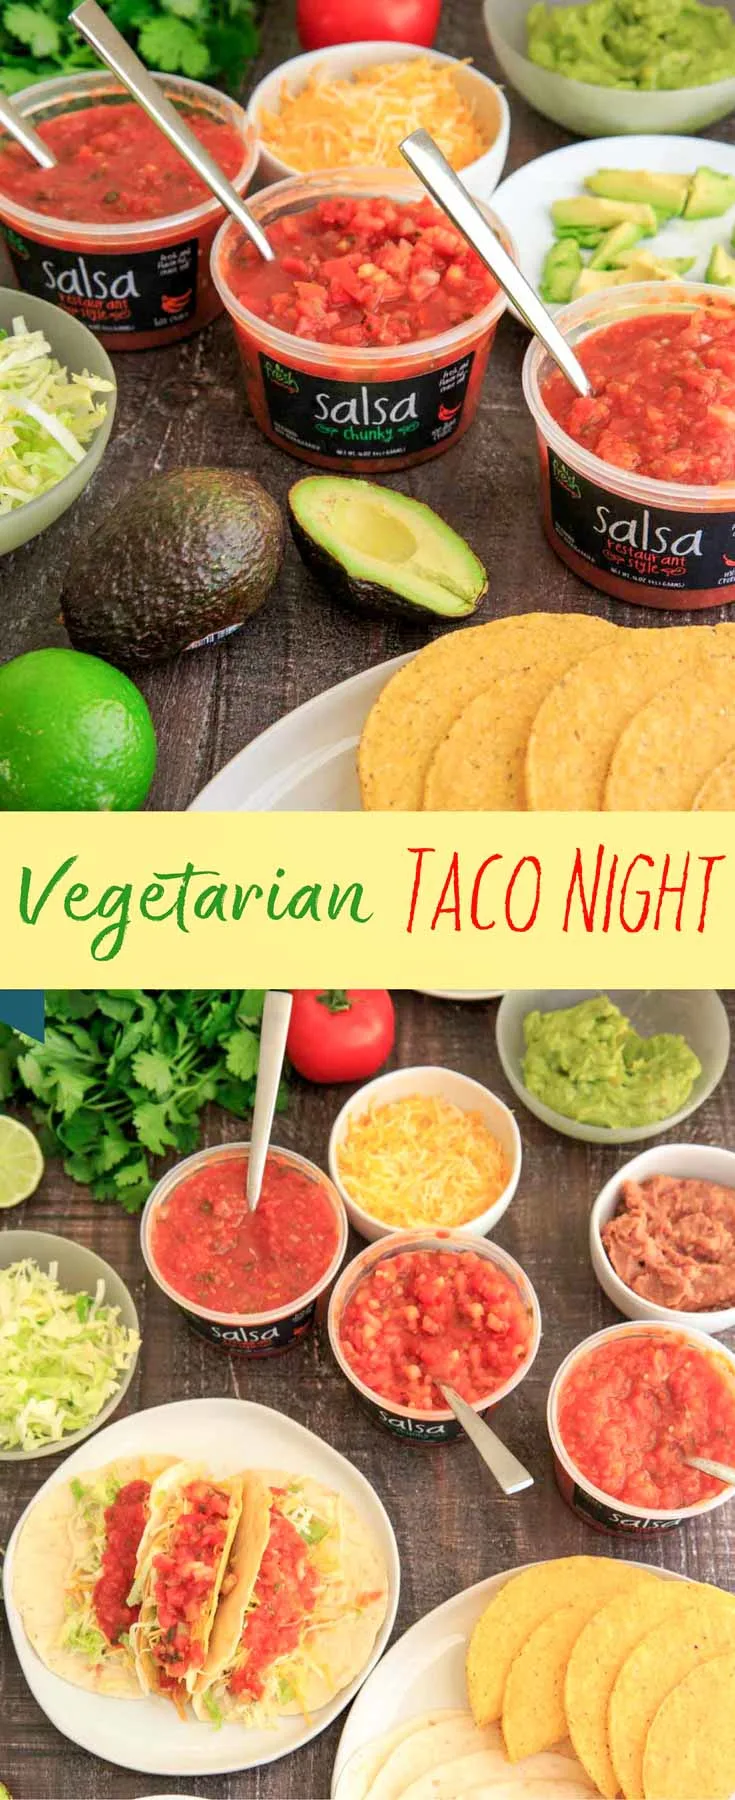 Host a make-your-own vegetarian taco night with all your favorites! Mix it up with different toppings, beans, veggies and shells. And of course - salsa.